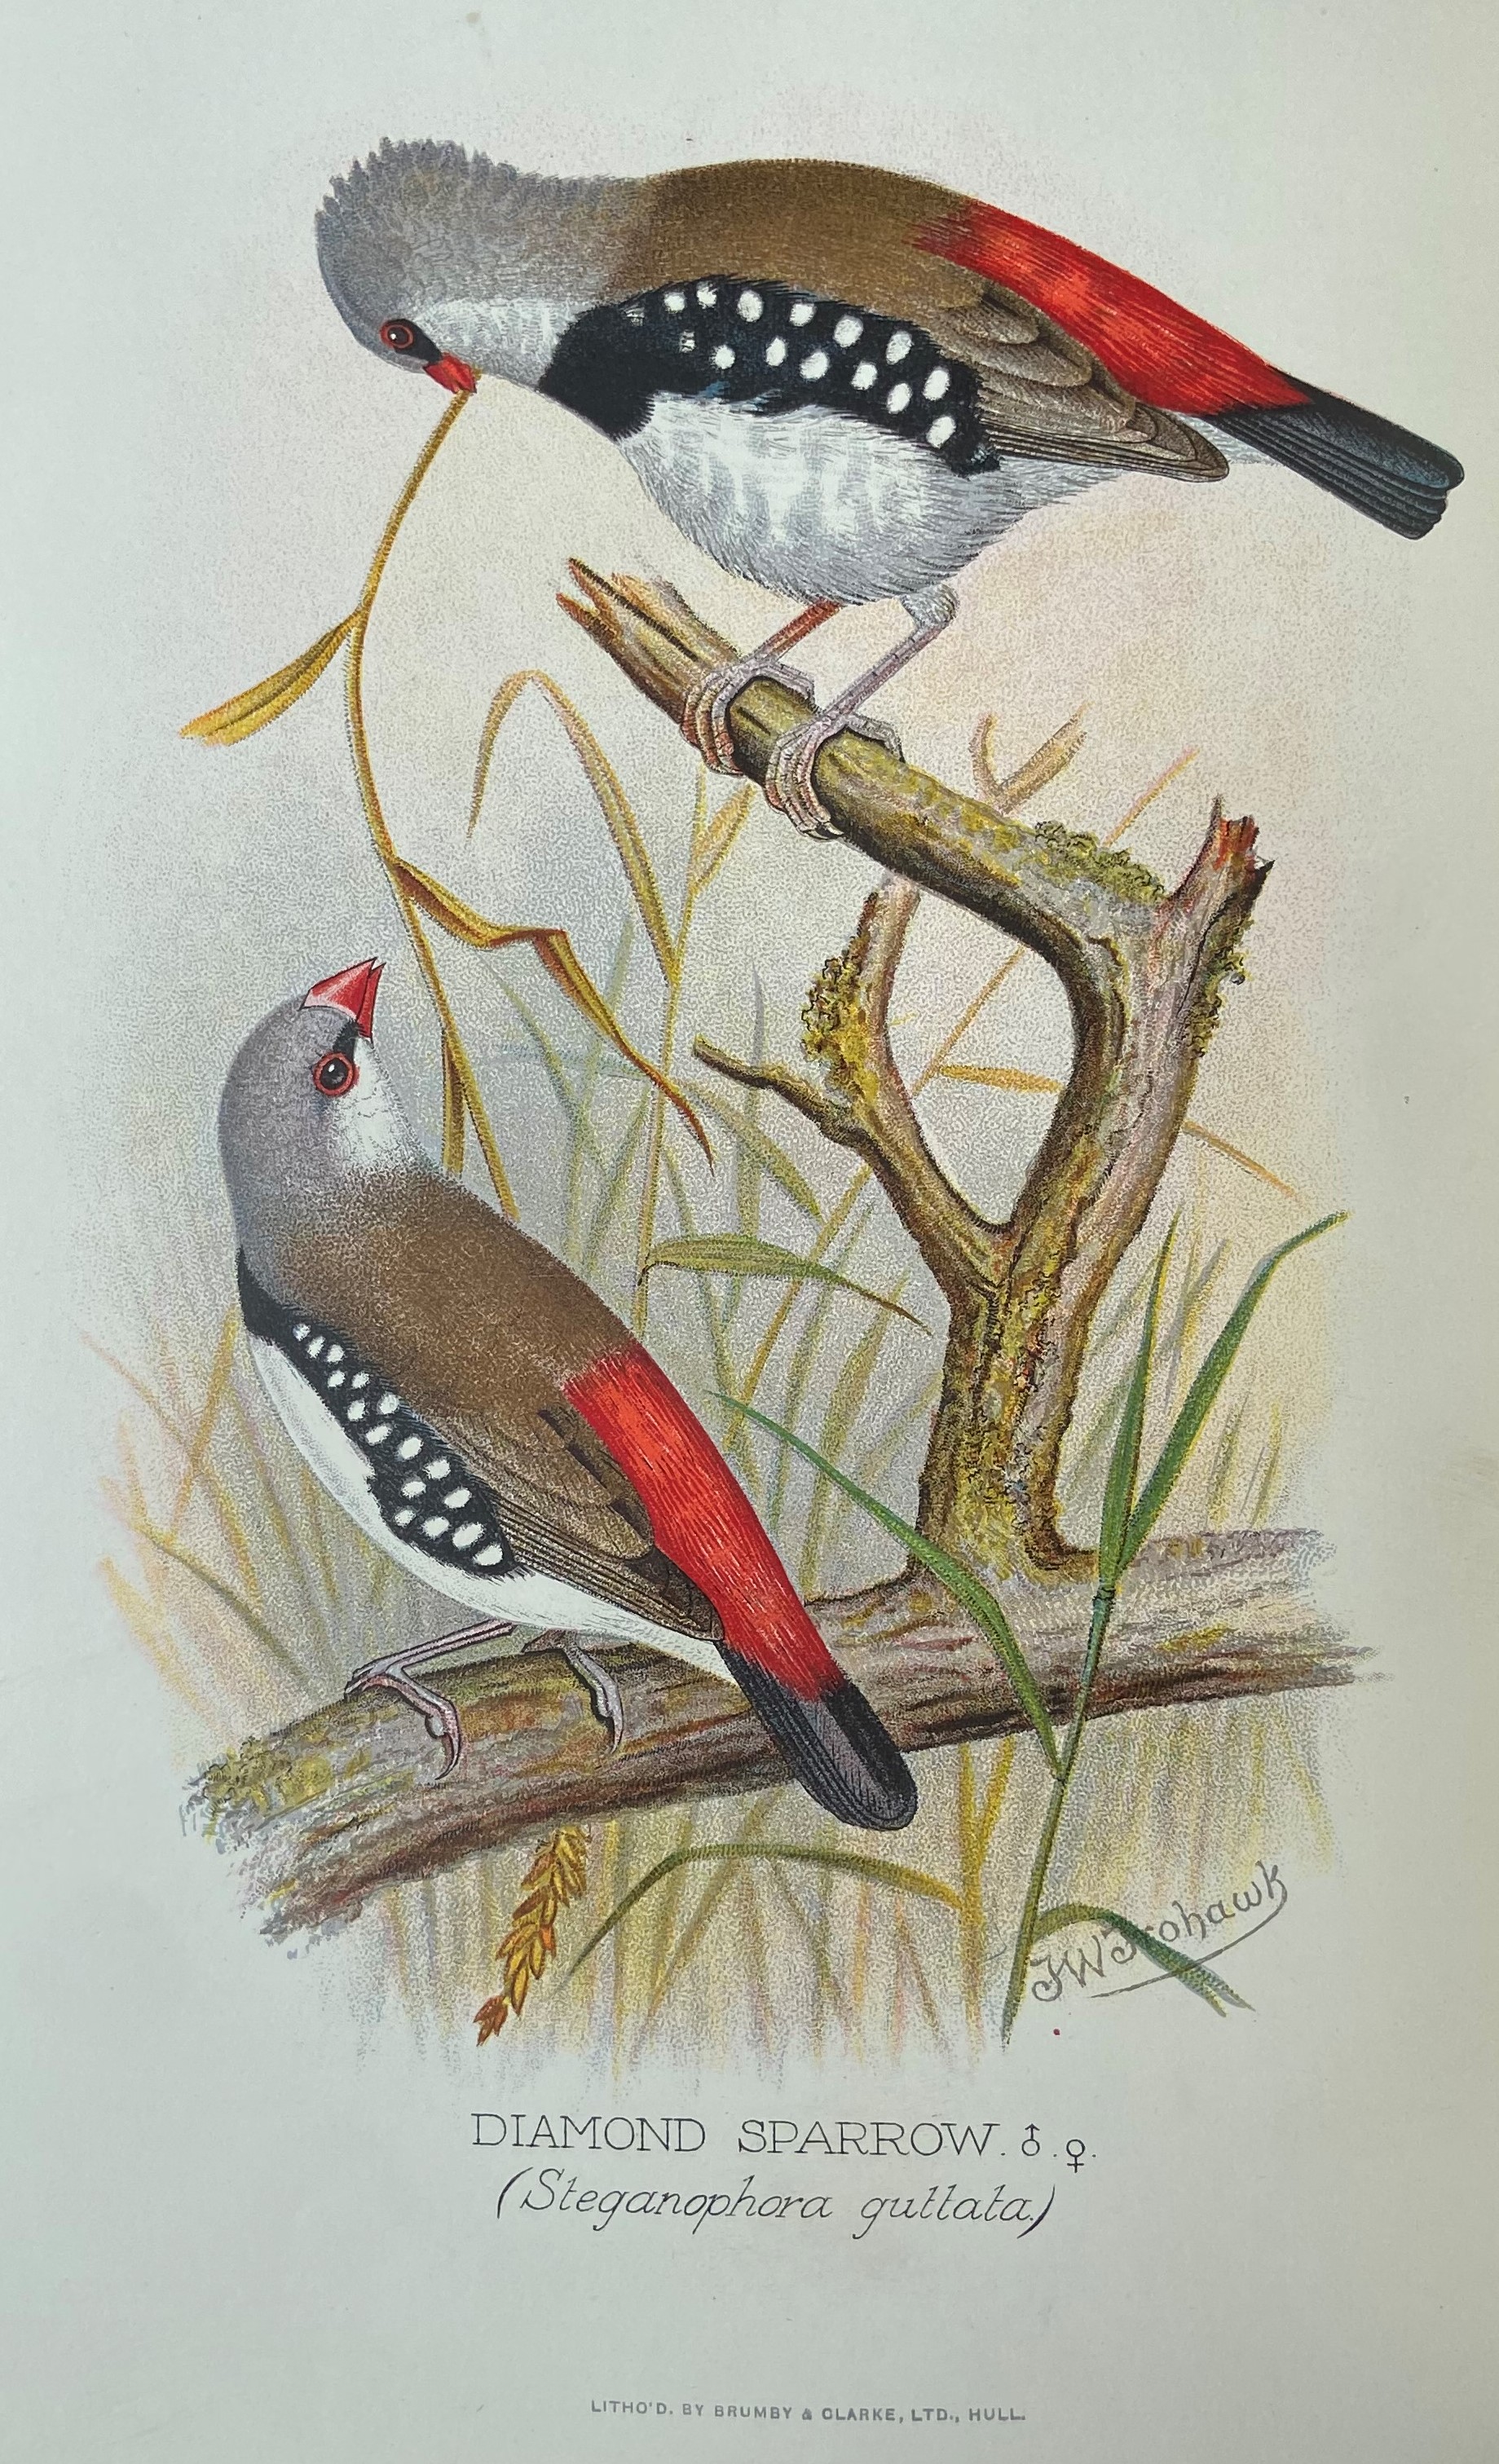 Butler (Arthur G.)ÿForeign Finches in Captivity, small folio Hull & L. 1899.ÿSecond Edn., 60 cold. - Image 2 of 2